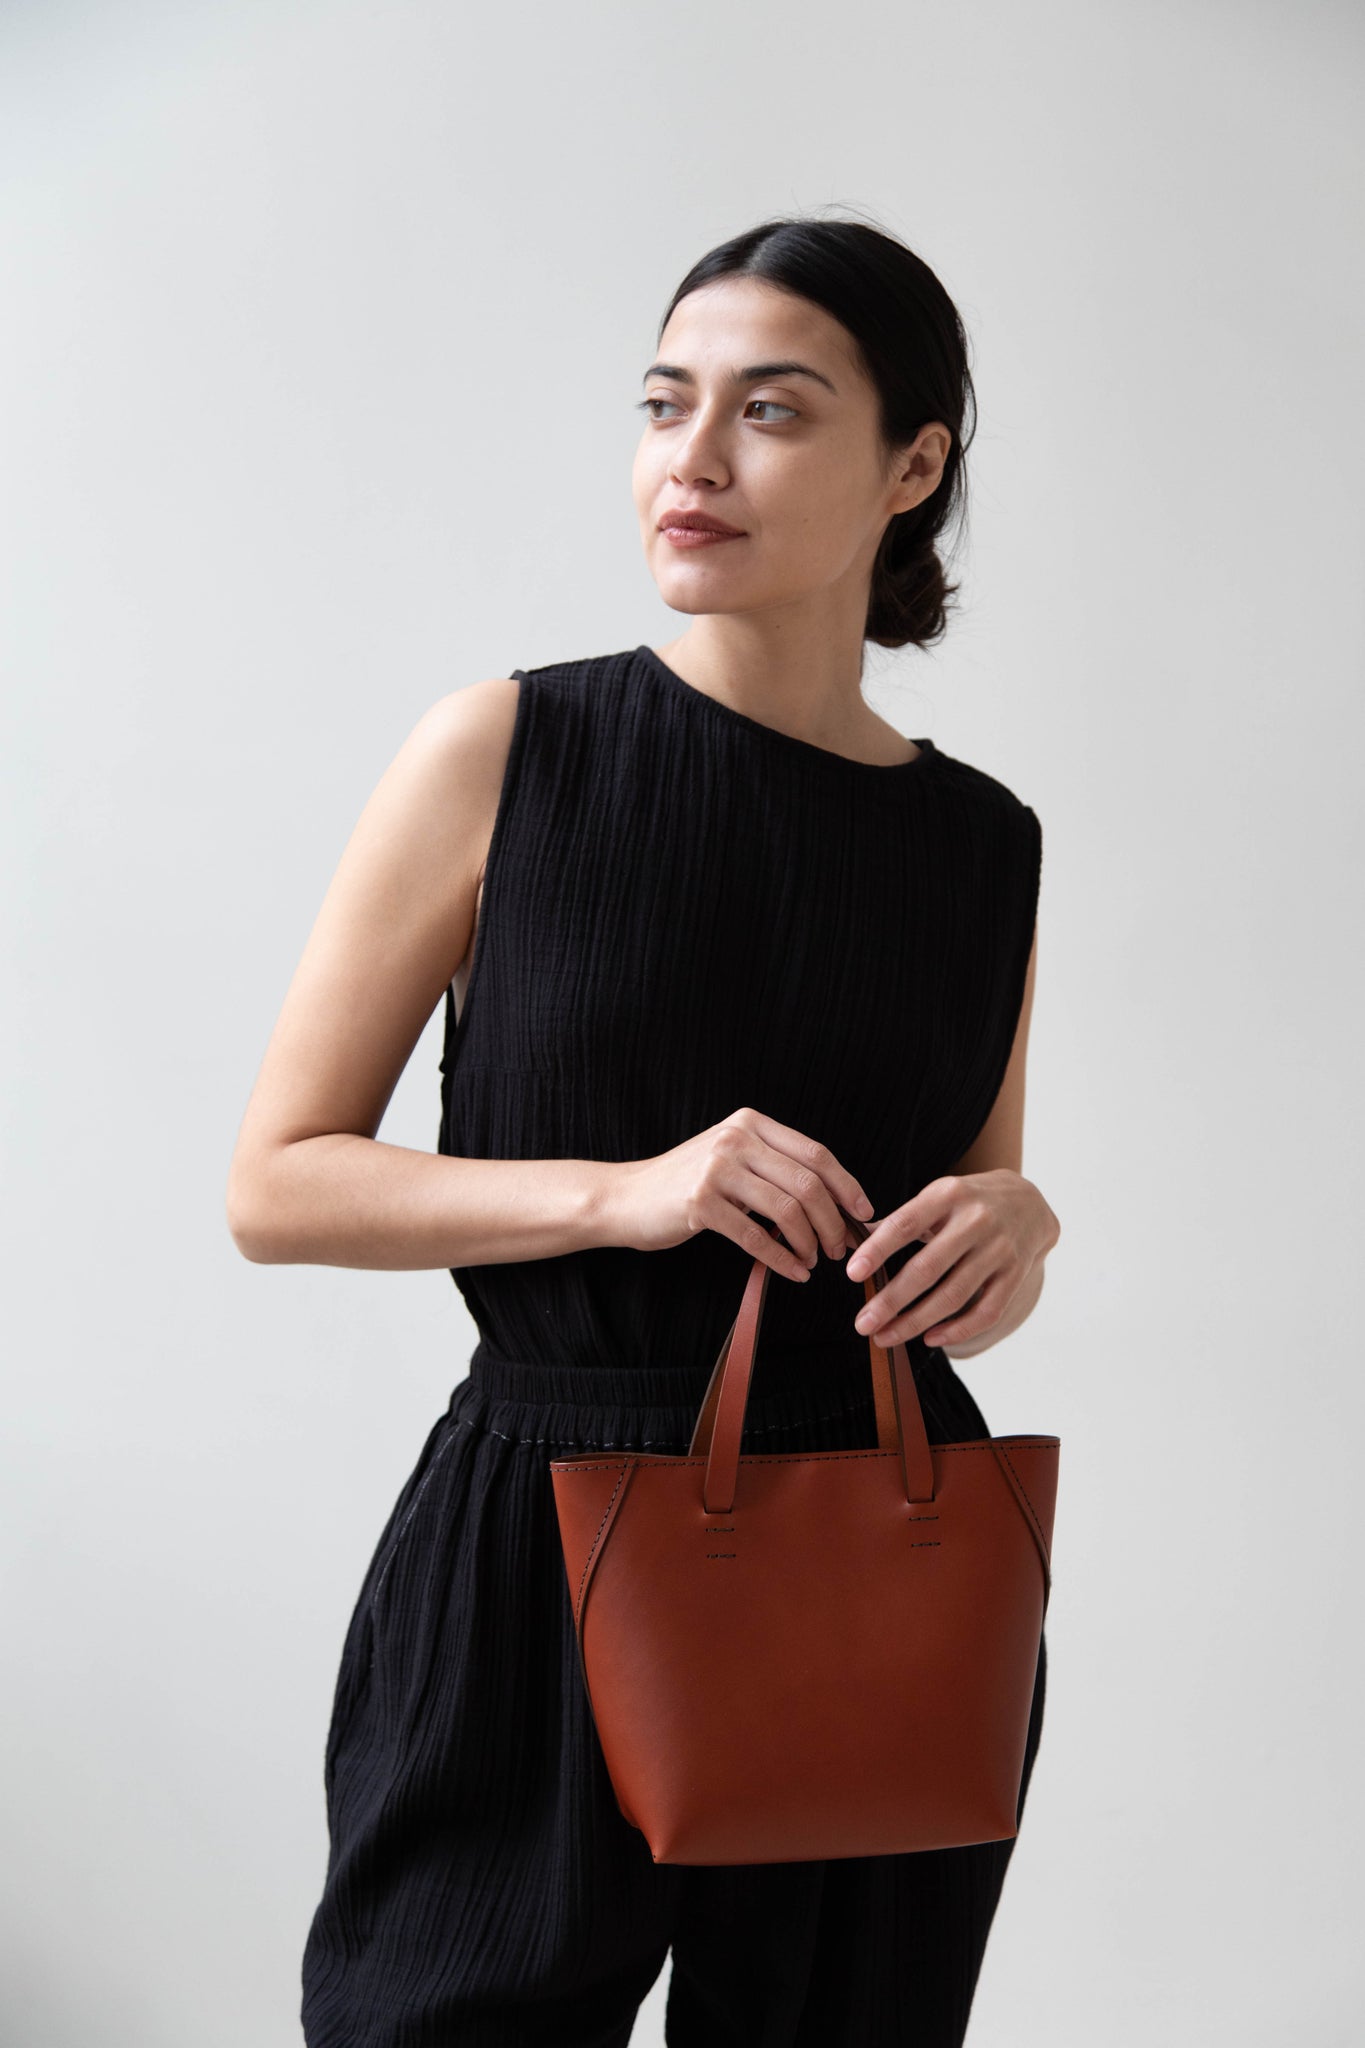 Melete Asis Small Tote in Chestnut